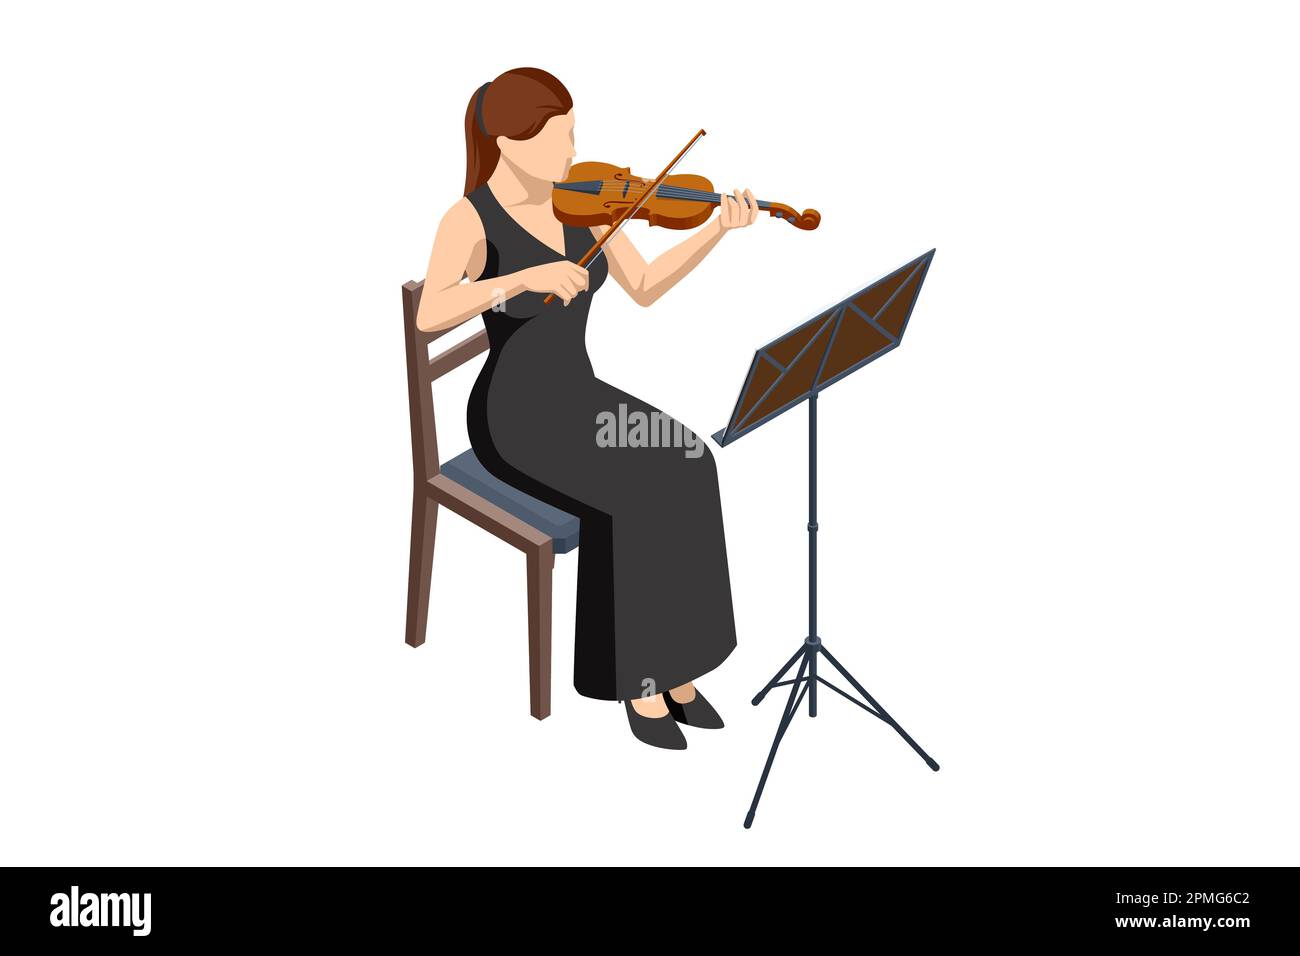 Isometric violinist. Woman playing the violin. Classical stringed musical instrument. Brown violin and bow. Music stand with notes. Stock Vector